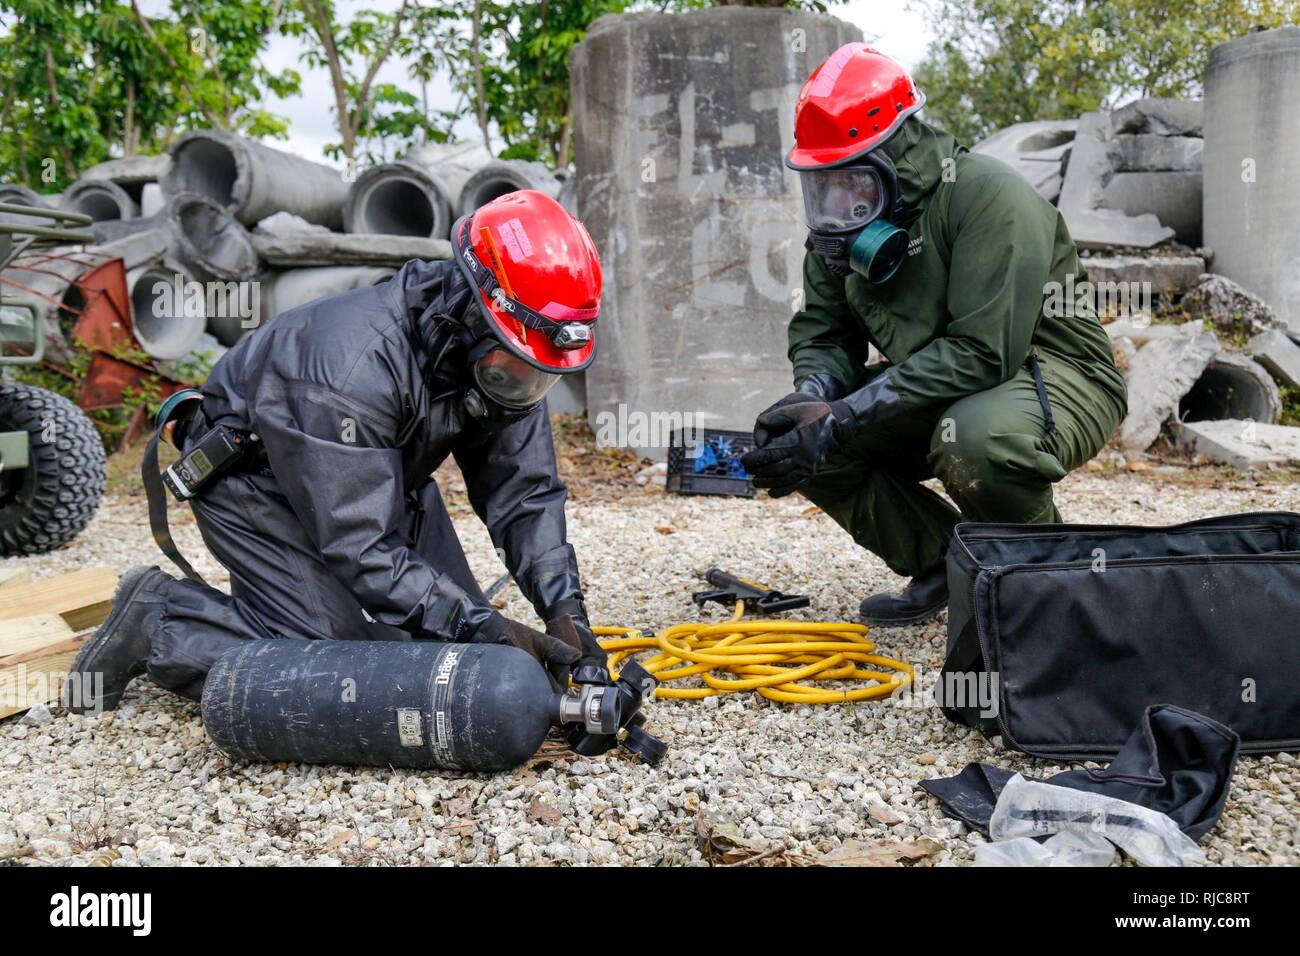 U. S. Army Reserve Soldiers assigned to 424th engineer Company prepares a compressed air tank in a Joint Training Exercise on the Miami-Dade Fire Rescue Urban Search and Rescue Training Site in Miami, Fla. Jan. 10, 2018. This JTE focused on building response capabilities and seamless transition between the local first responders and the follow-on support provided by the National Guard and Active duty soldiers. (U. S. Army Stock Photo